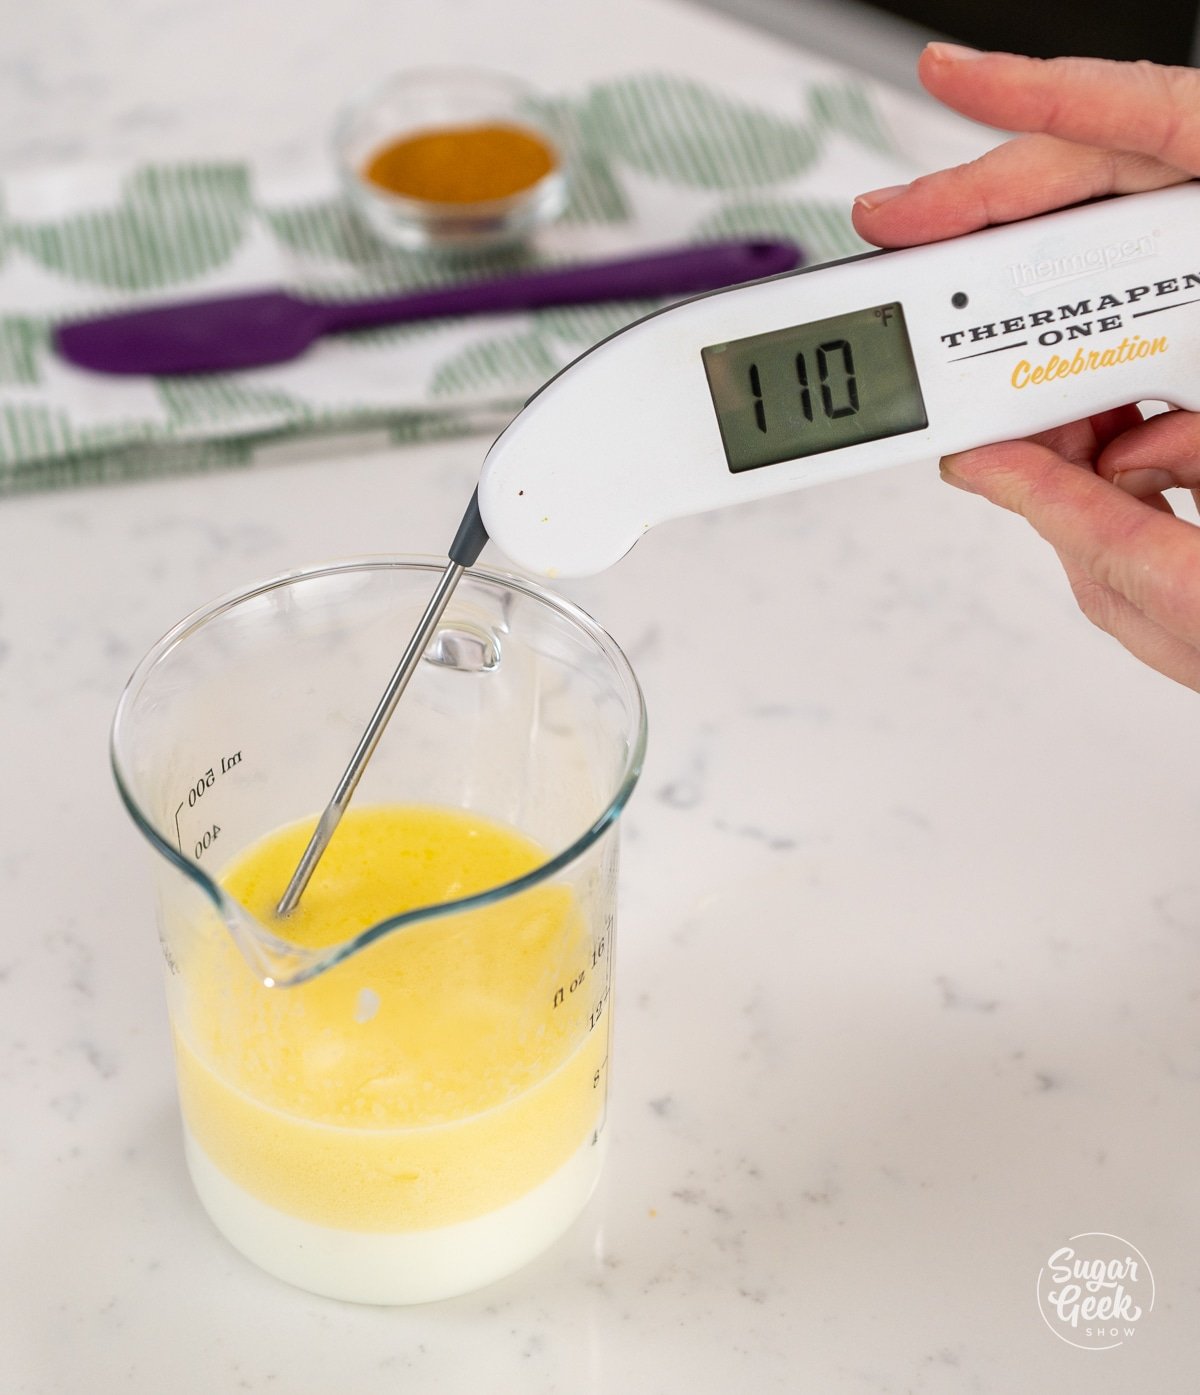 melted butter and milk in a container with a thermometer reading 110